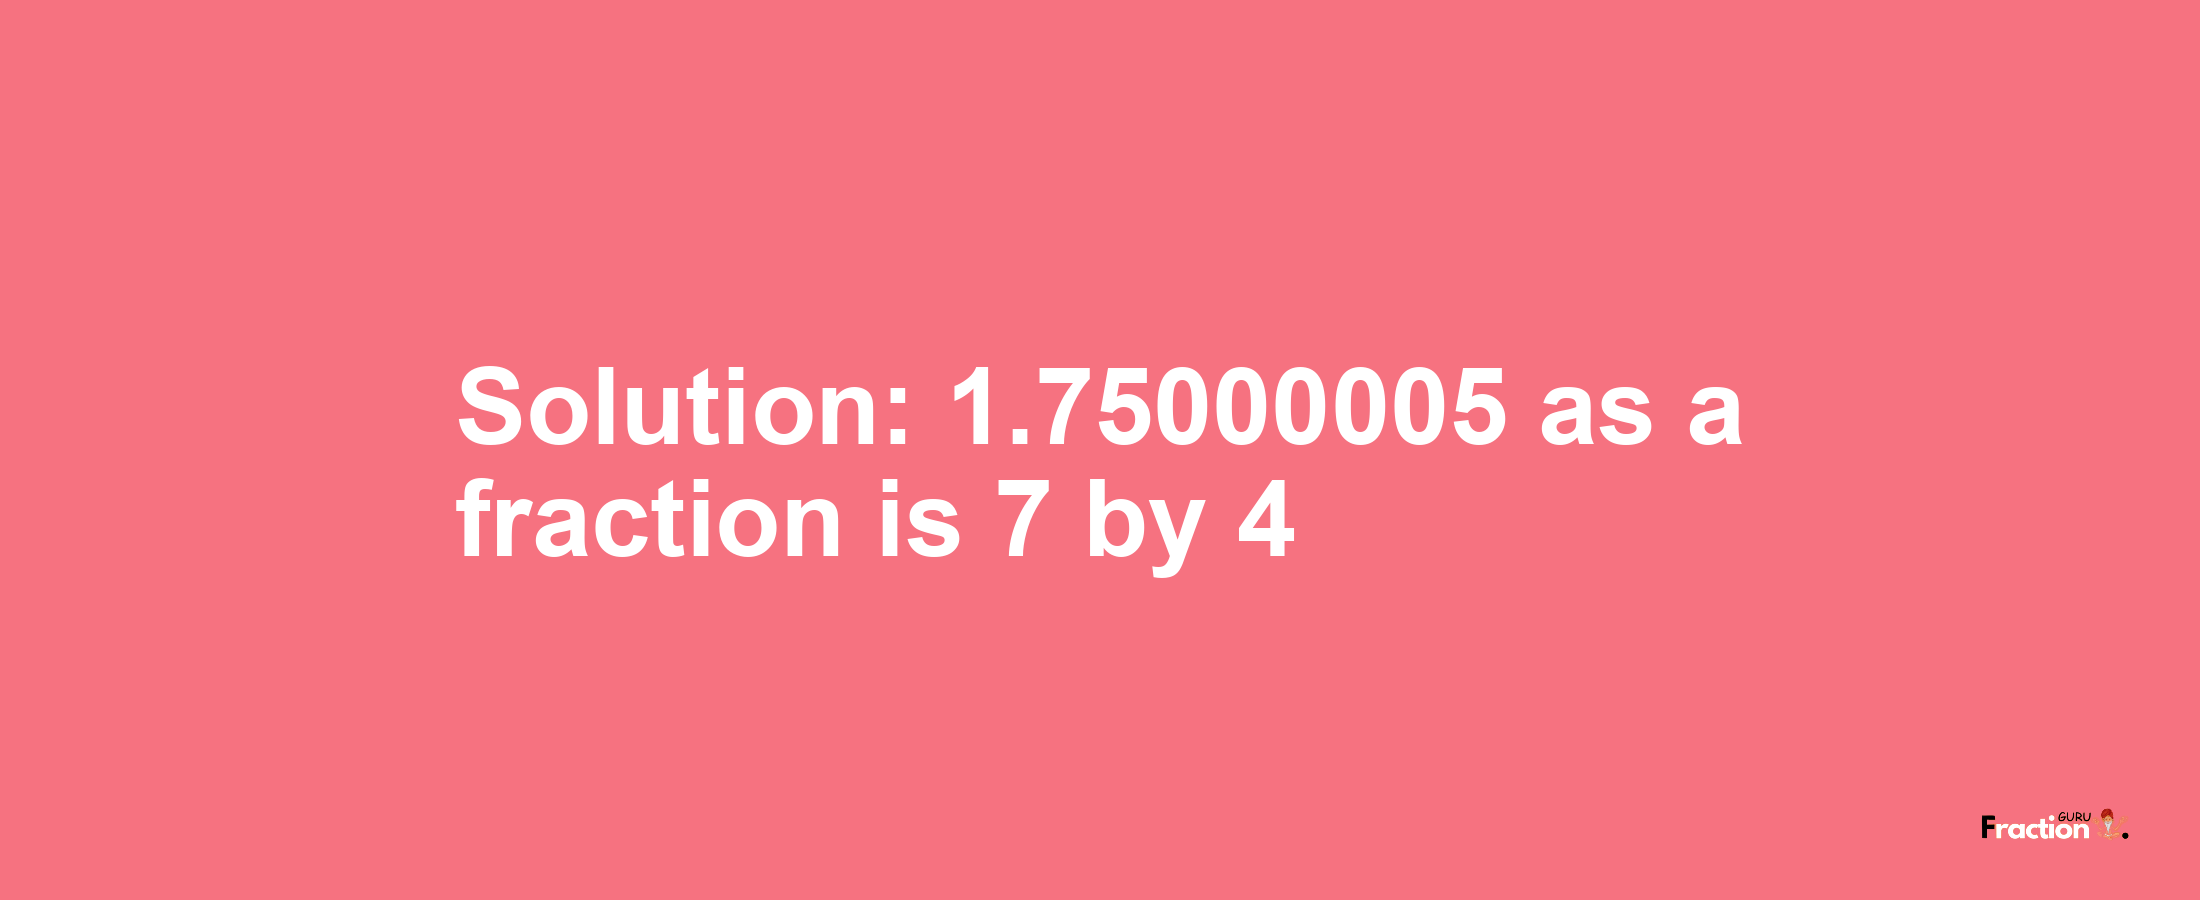 Solution:1.75000005 as a fraction is 7/4